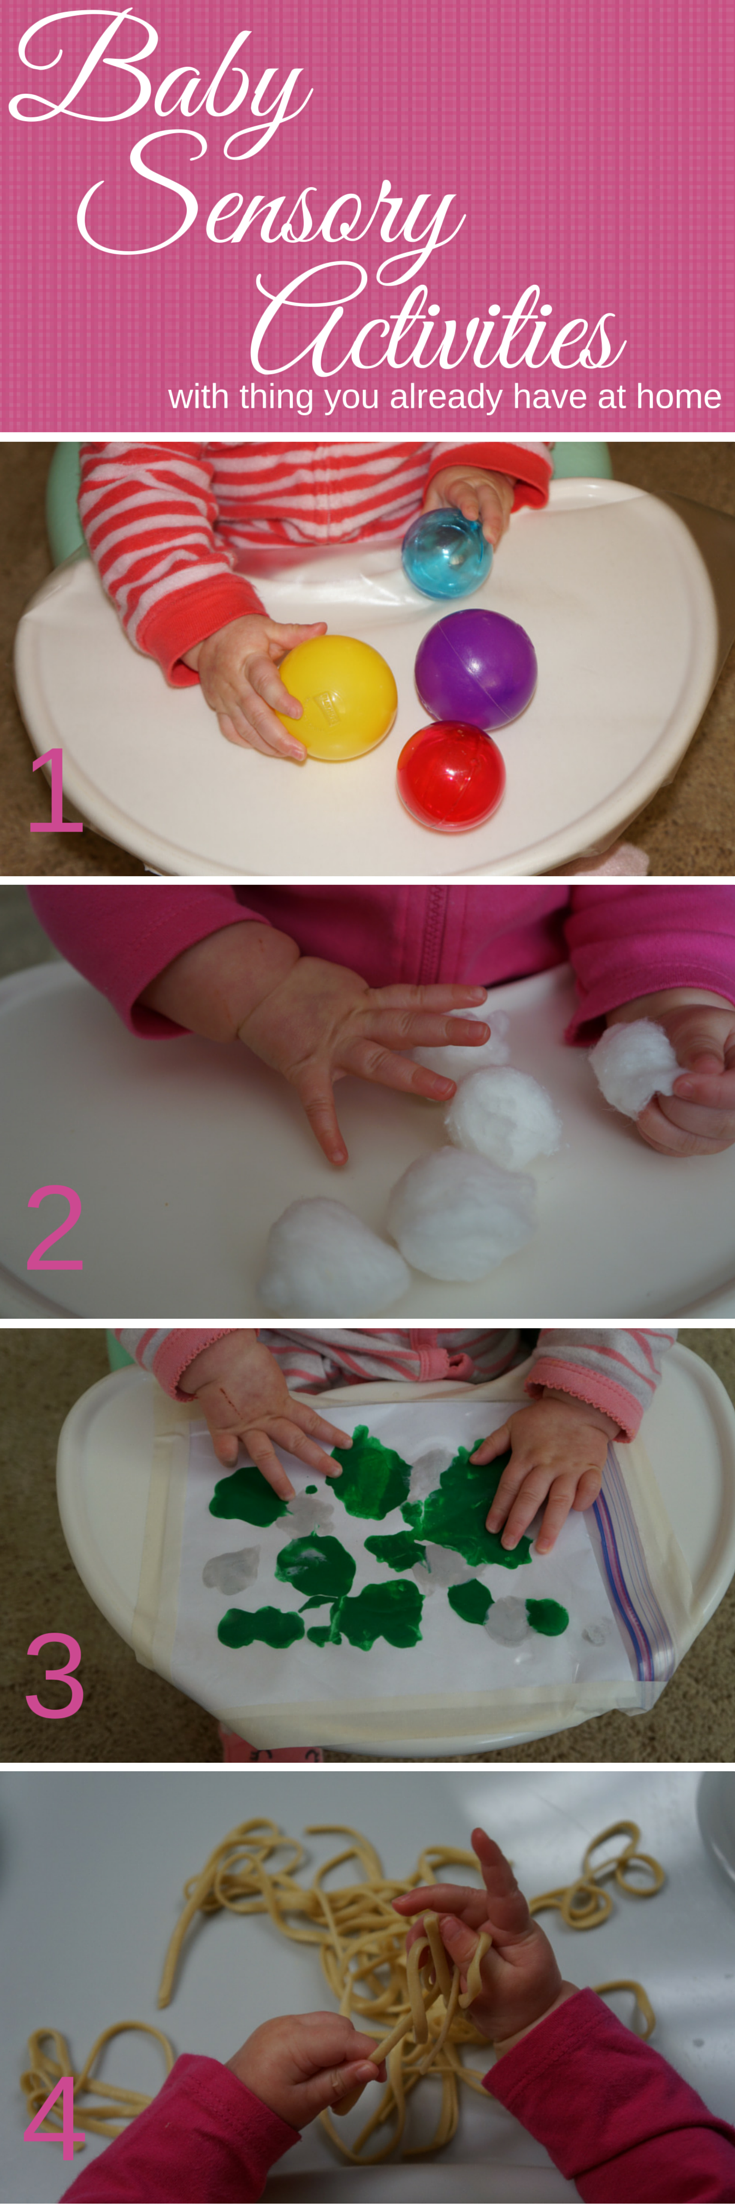 baby sensory activities don't have to be hard to do- ways to use items you already have around the house